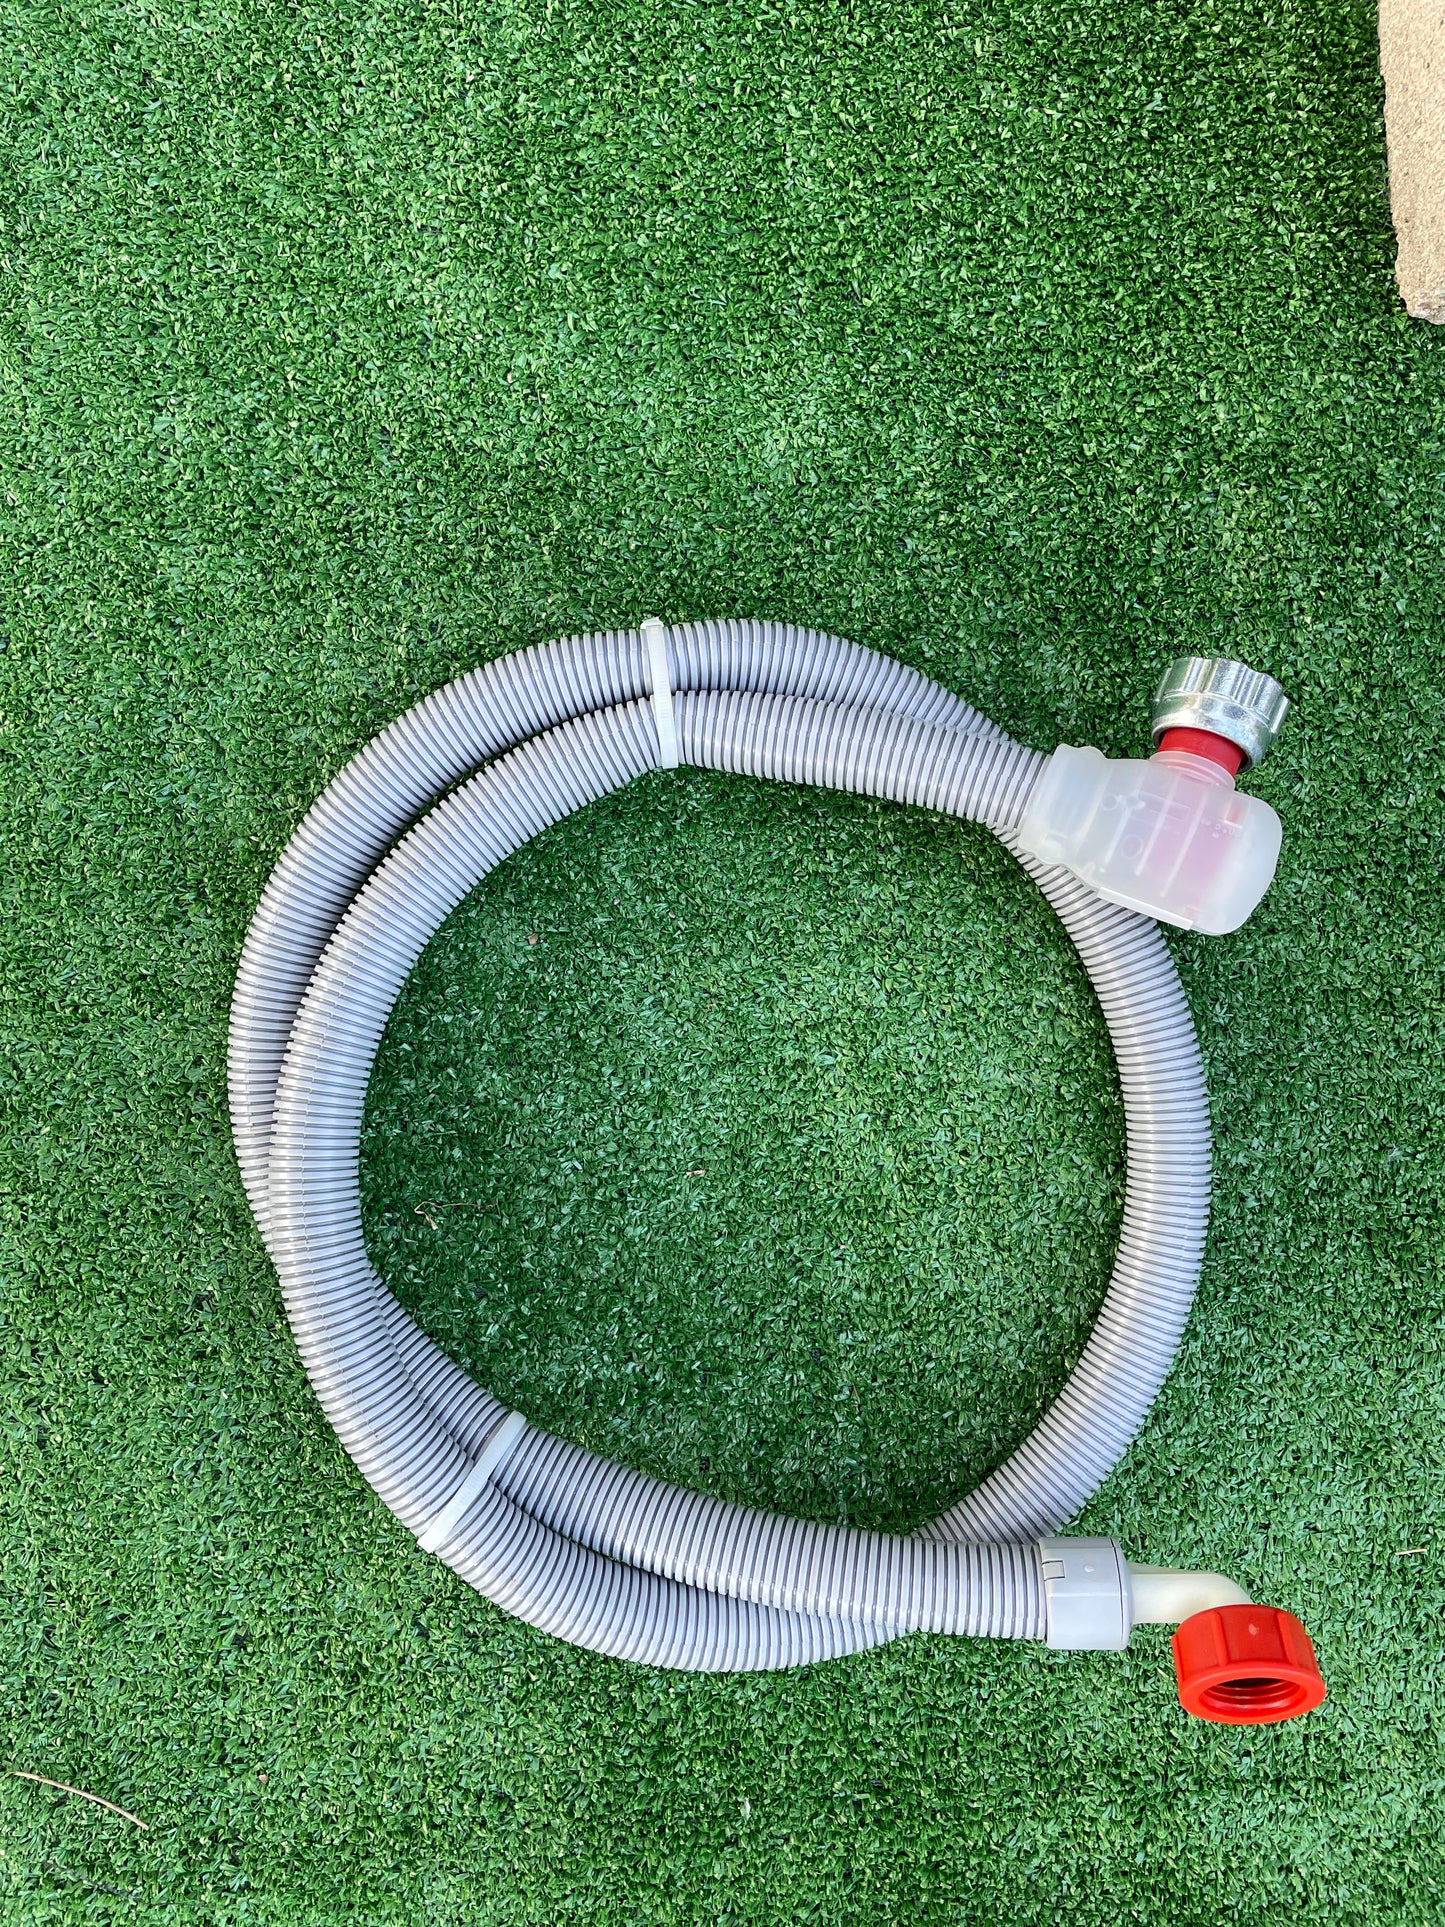 Hot water dishwasher supply hose with automatic shutoff valve to prevent leaks and floods. This durable hose features a braided inner supply hose shielded in a corrugated outer plastic casing for extra protection. The automatic shutoff valve quickly cuts off the water source if a leak is detected, helping to prevent costly water damage.